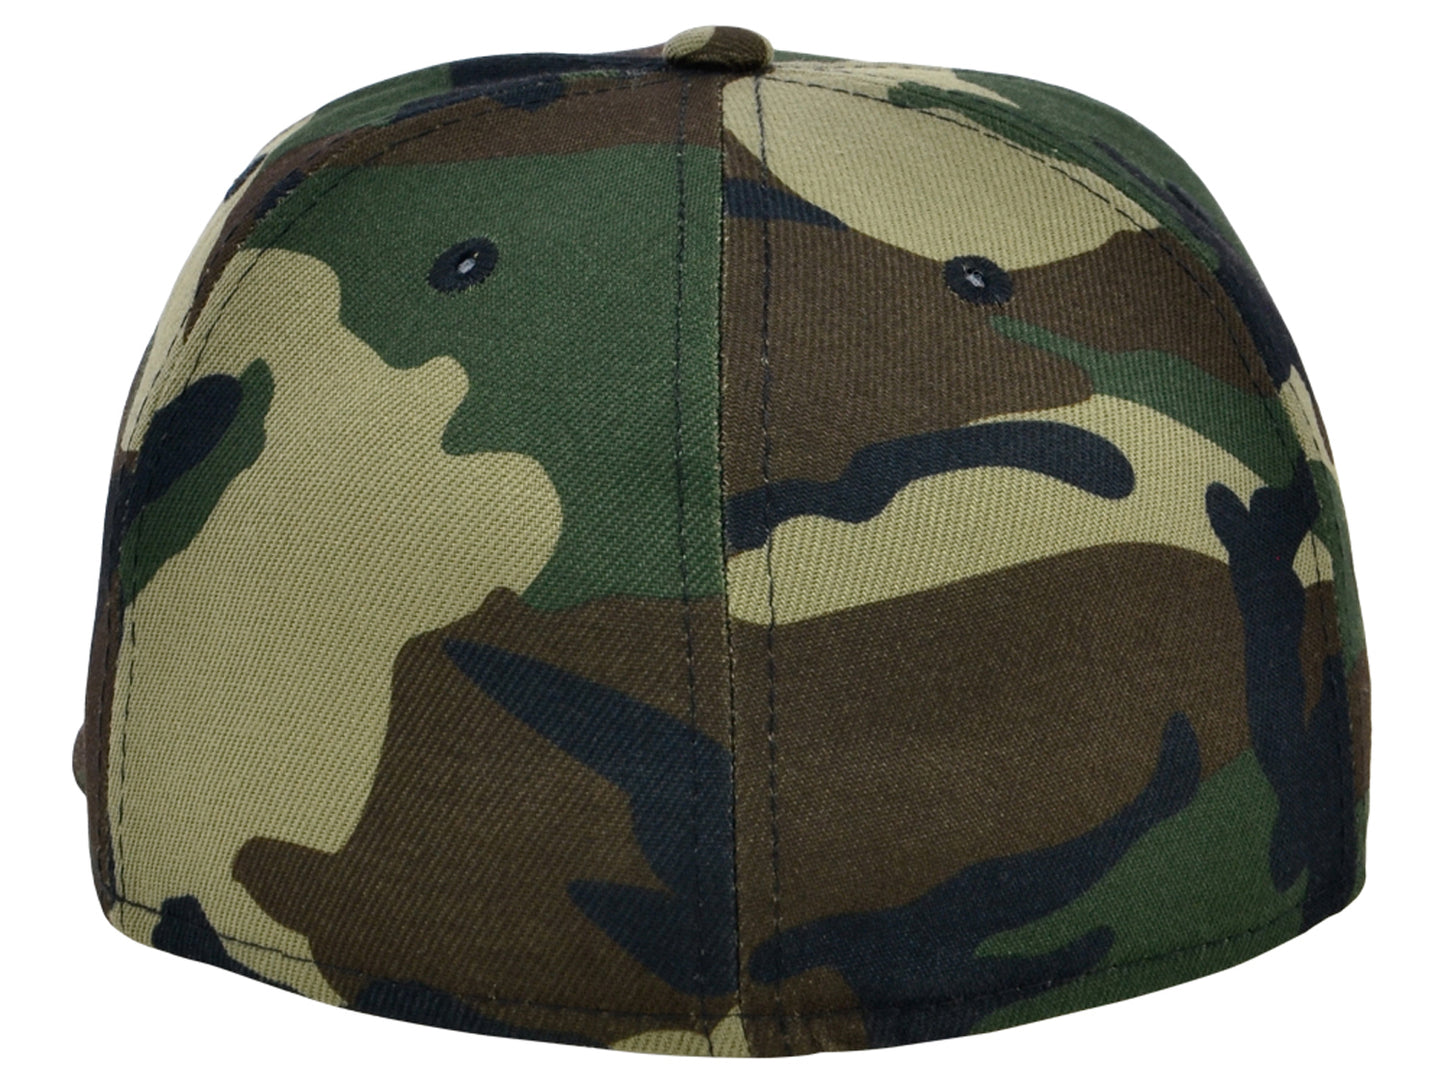 Crowns By Lids Full Court Fitted Cap - Camo